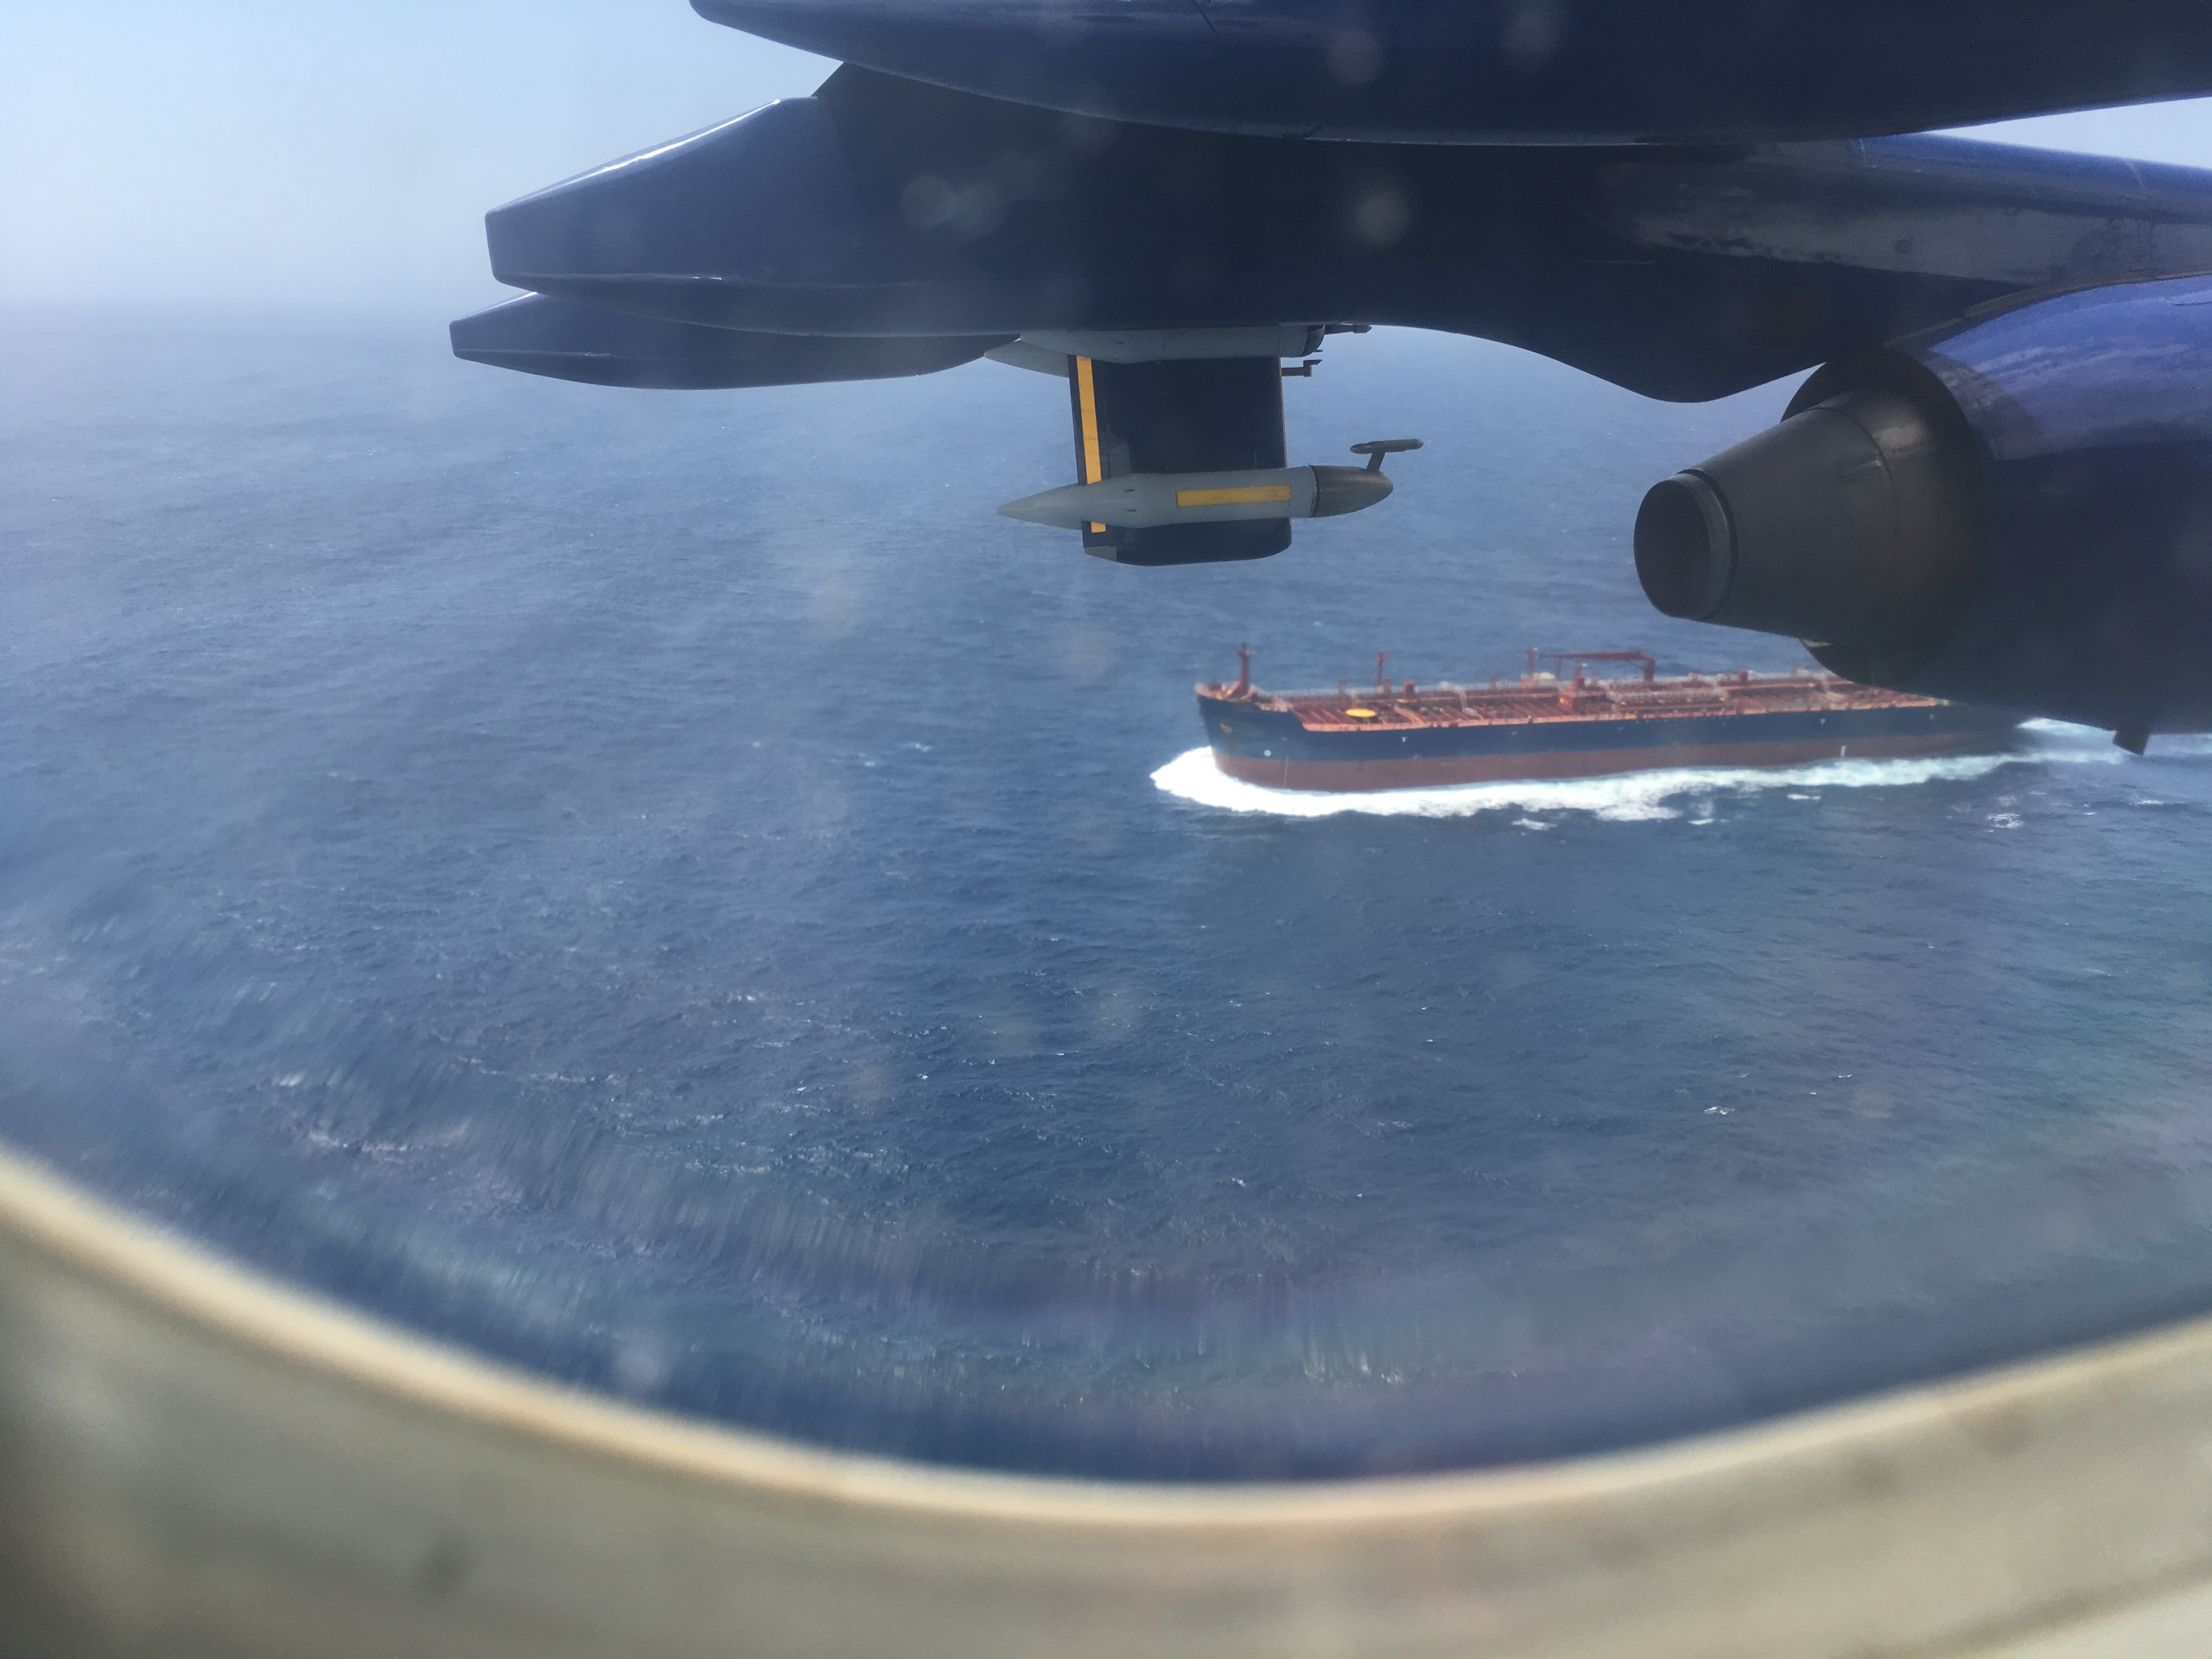 A large ship and part of a plane wing, viewed from inside an aeroplane